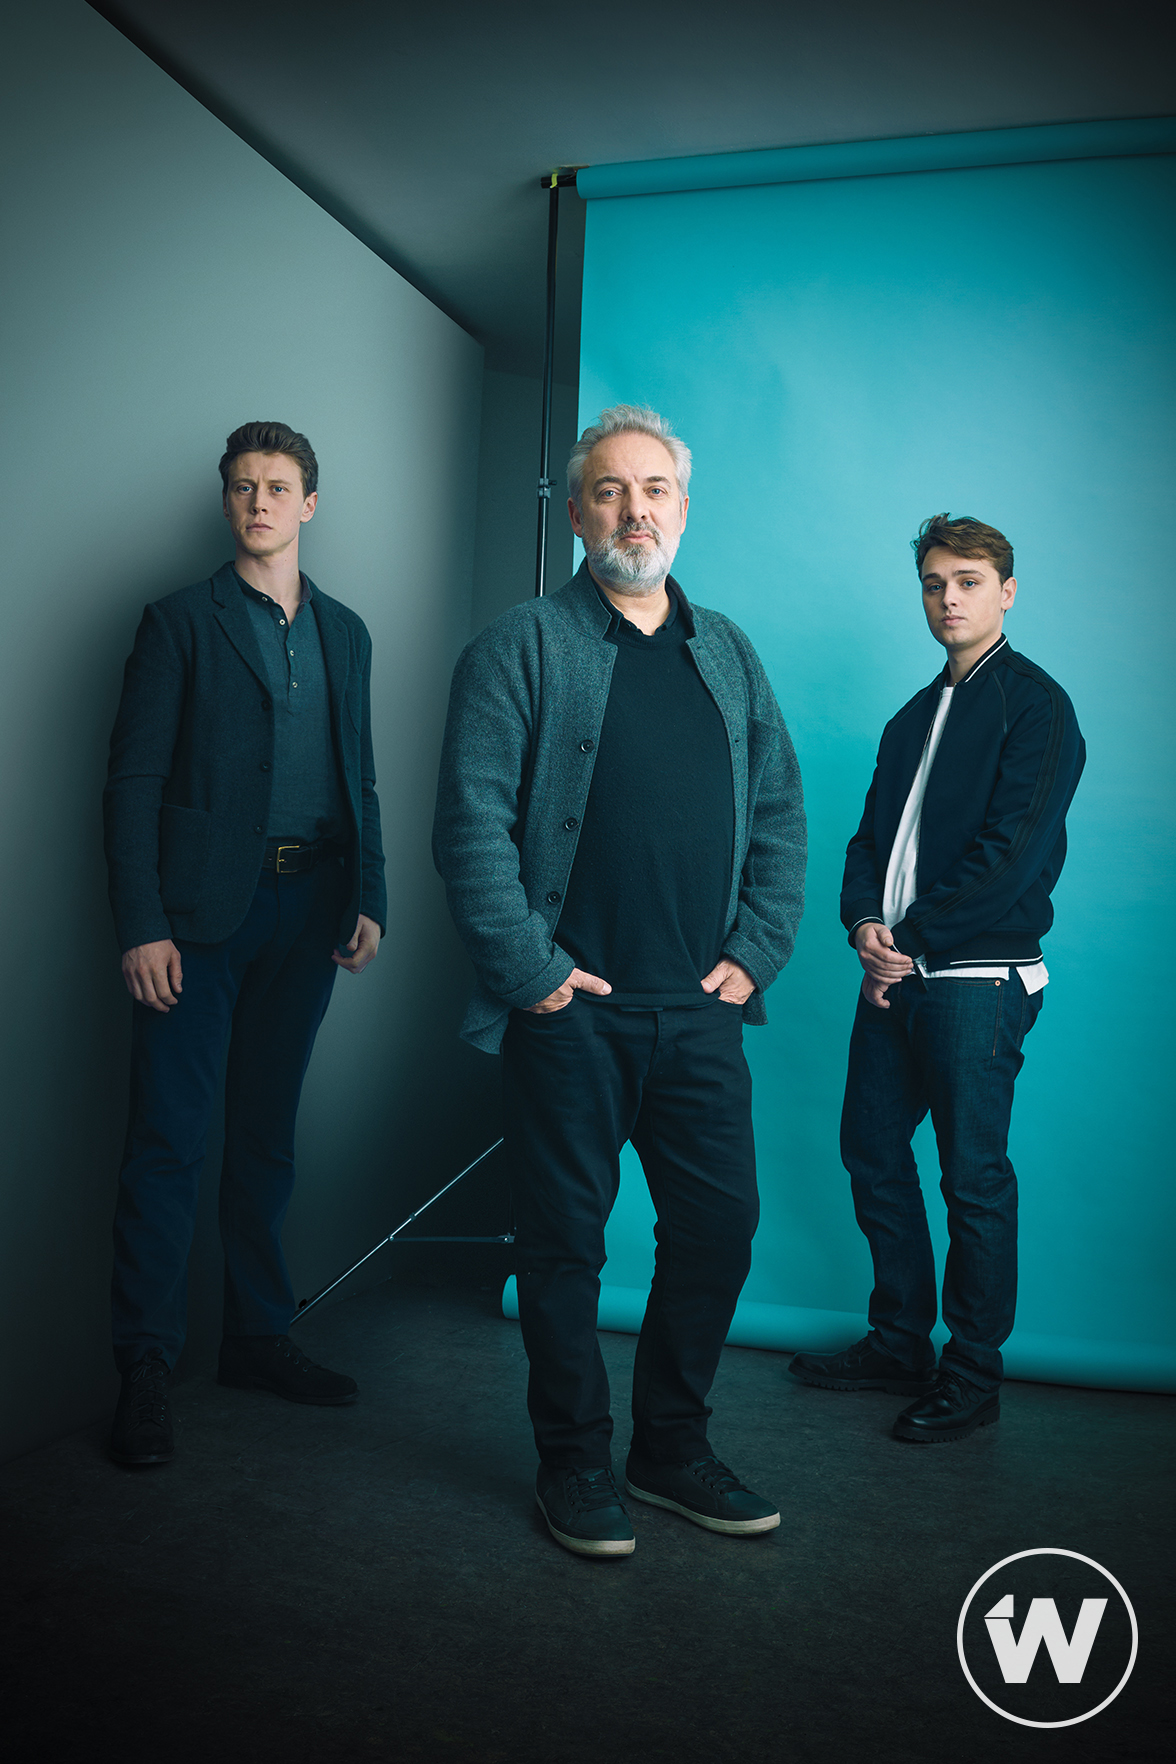 George MacKay, Dean-Charles Chapman and Sam Mendes - The Wrap Photoshoot - 2019